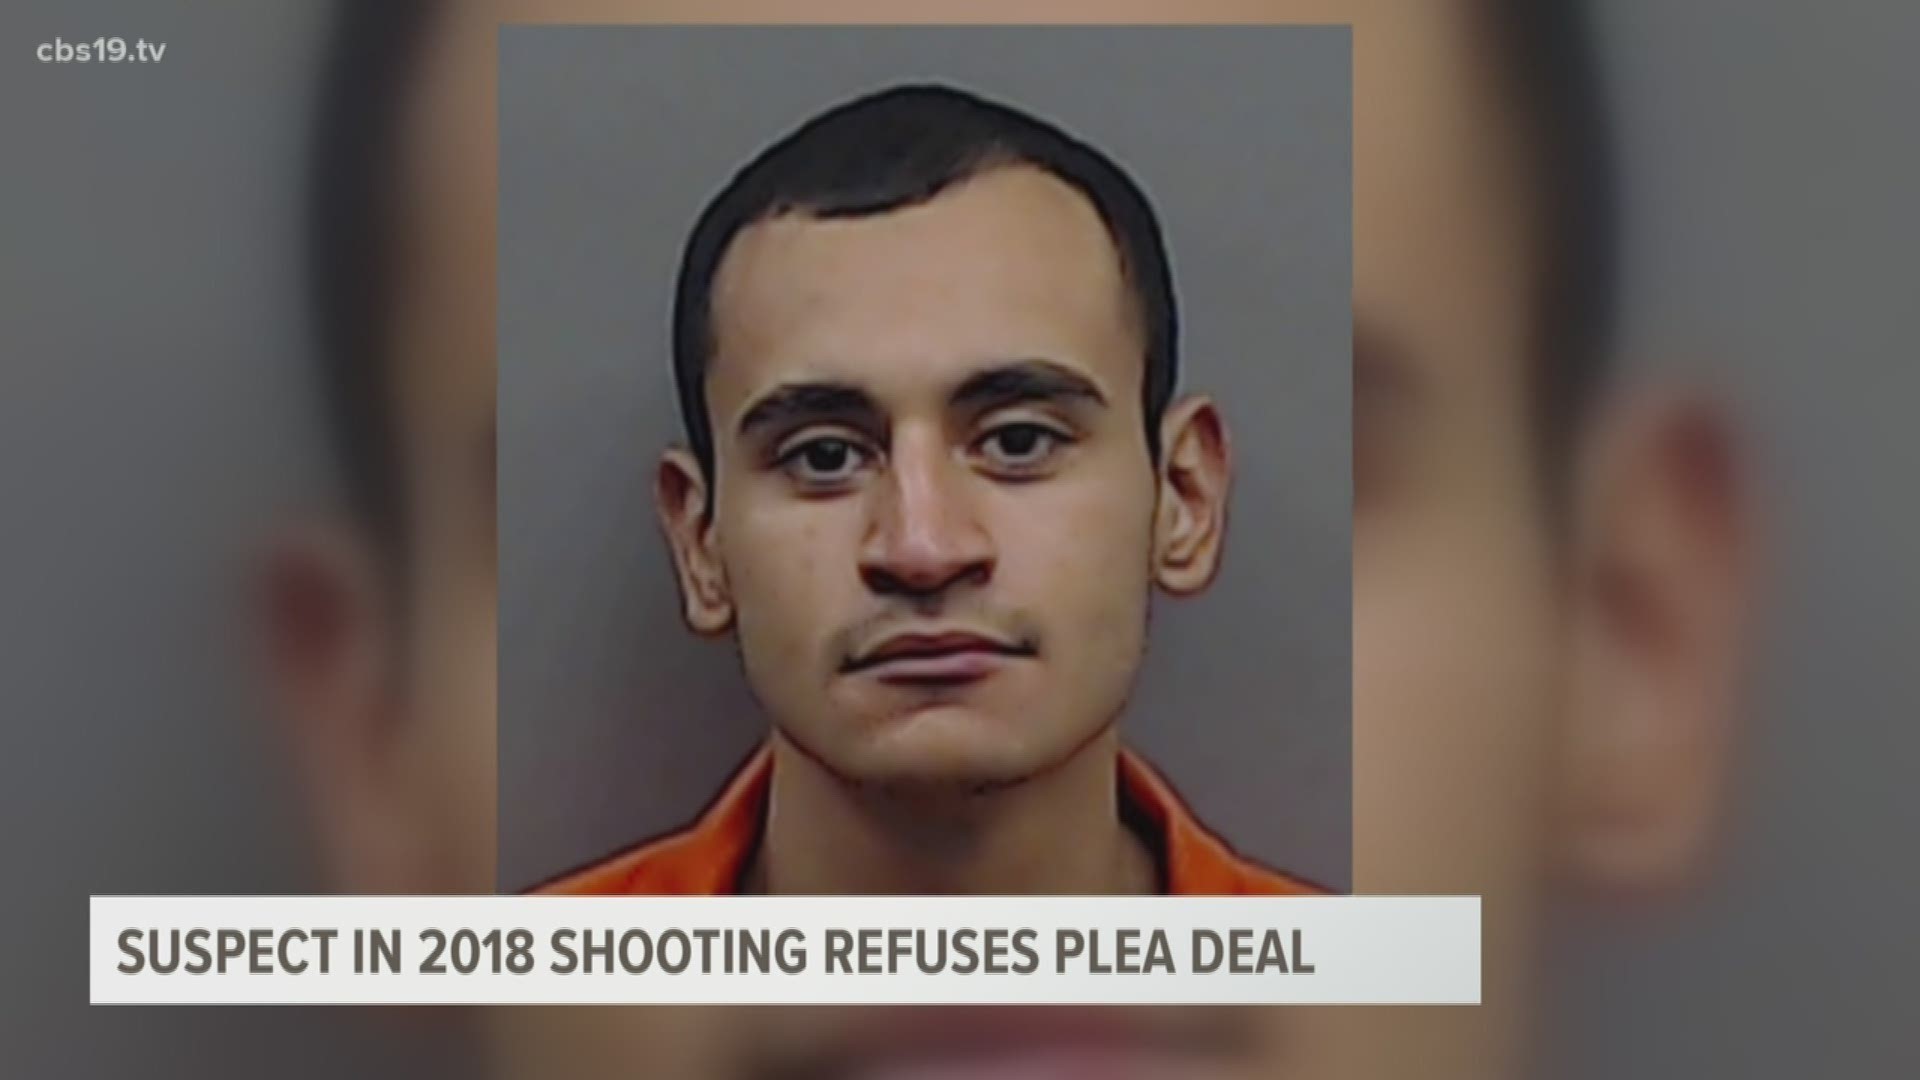 Perdomo is facing murder charges after a deadly shooting at a Tyler parking lot.